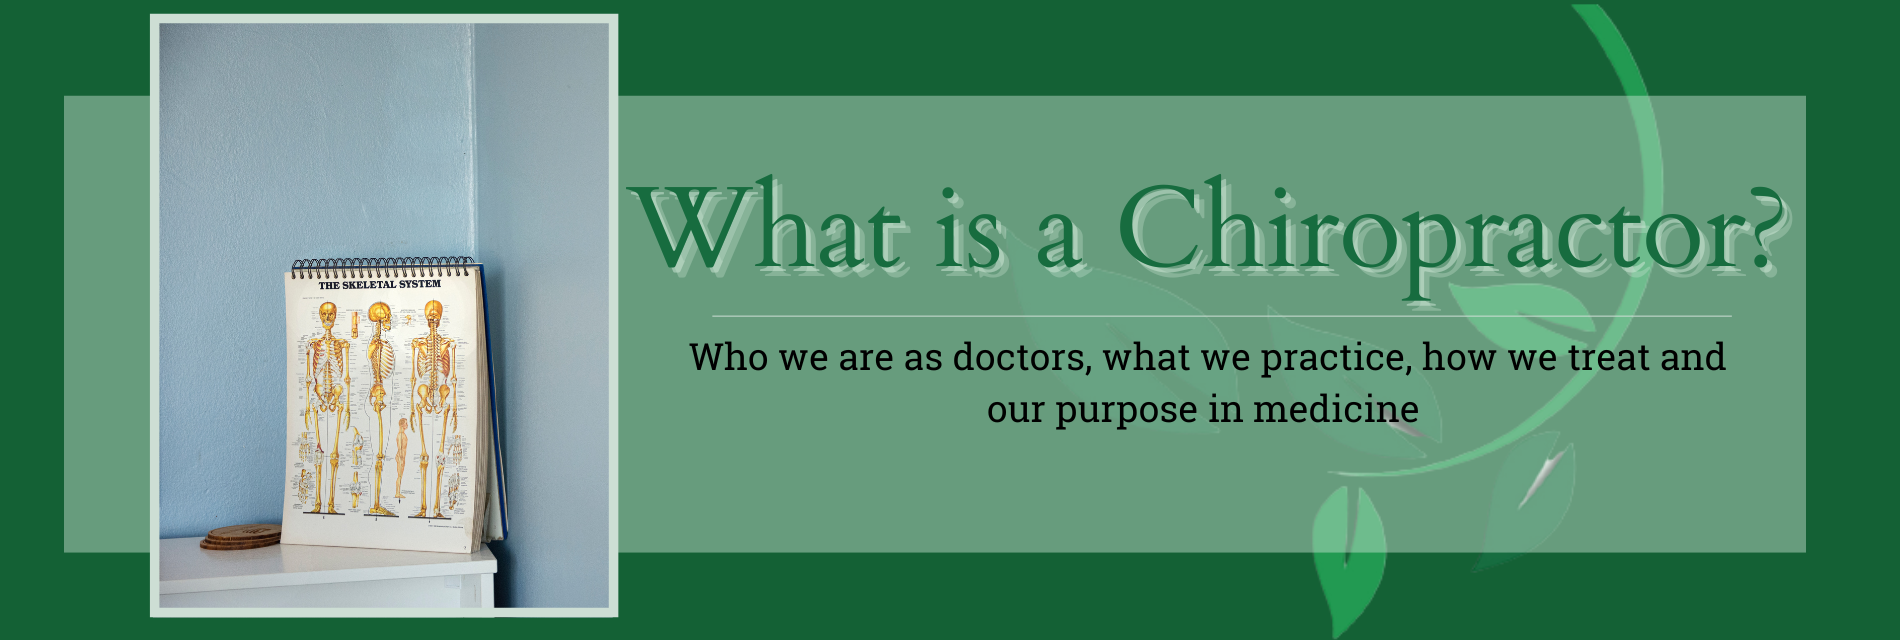 SpineWorks - What is a Chiropractor? Header